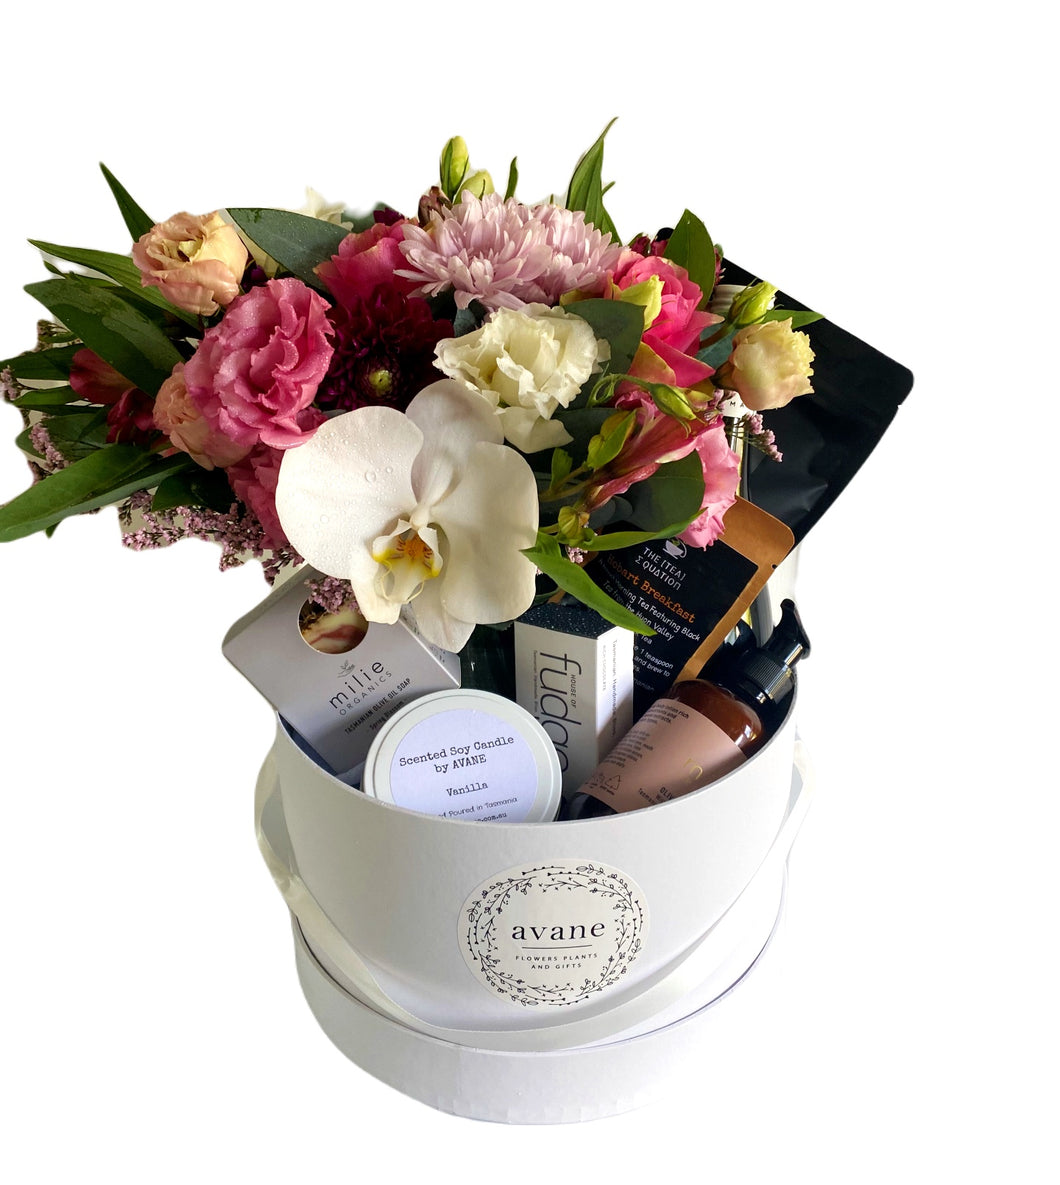 A fabulously luxe hamper with everything lovely. All Tasmanian goodies including:   - A gorgeous posy of seasonal pink and white blooms in a glass vase   - Vanilla Soy Candle   - Tasmanian Devil Fudge (100g)   - Spring Blossom Olive Oil Soap (115g)   - Spring Blossom Bath Bomb    - Spring Blossom Olive Oil Magnesium Bath Soak (250g)  - Spring Blossom Olive Oil Body Lotion (200ml)  - 